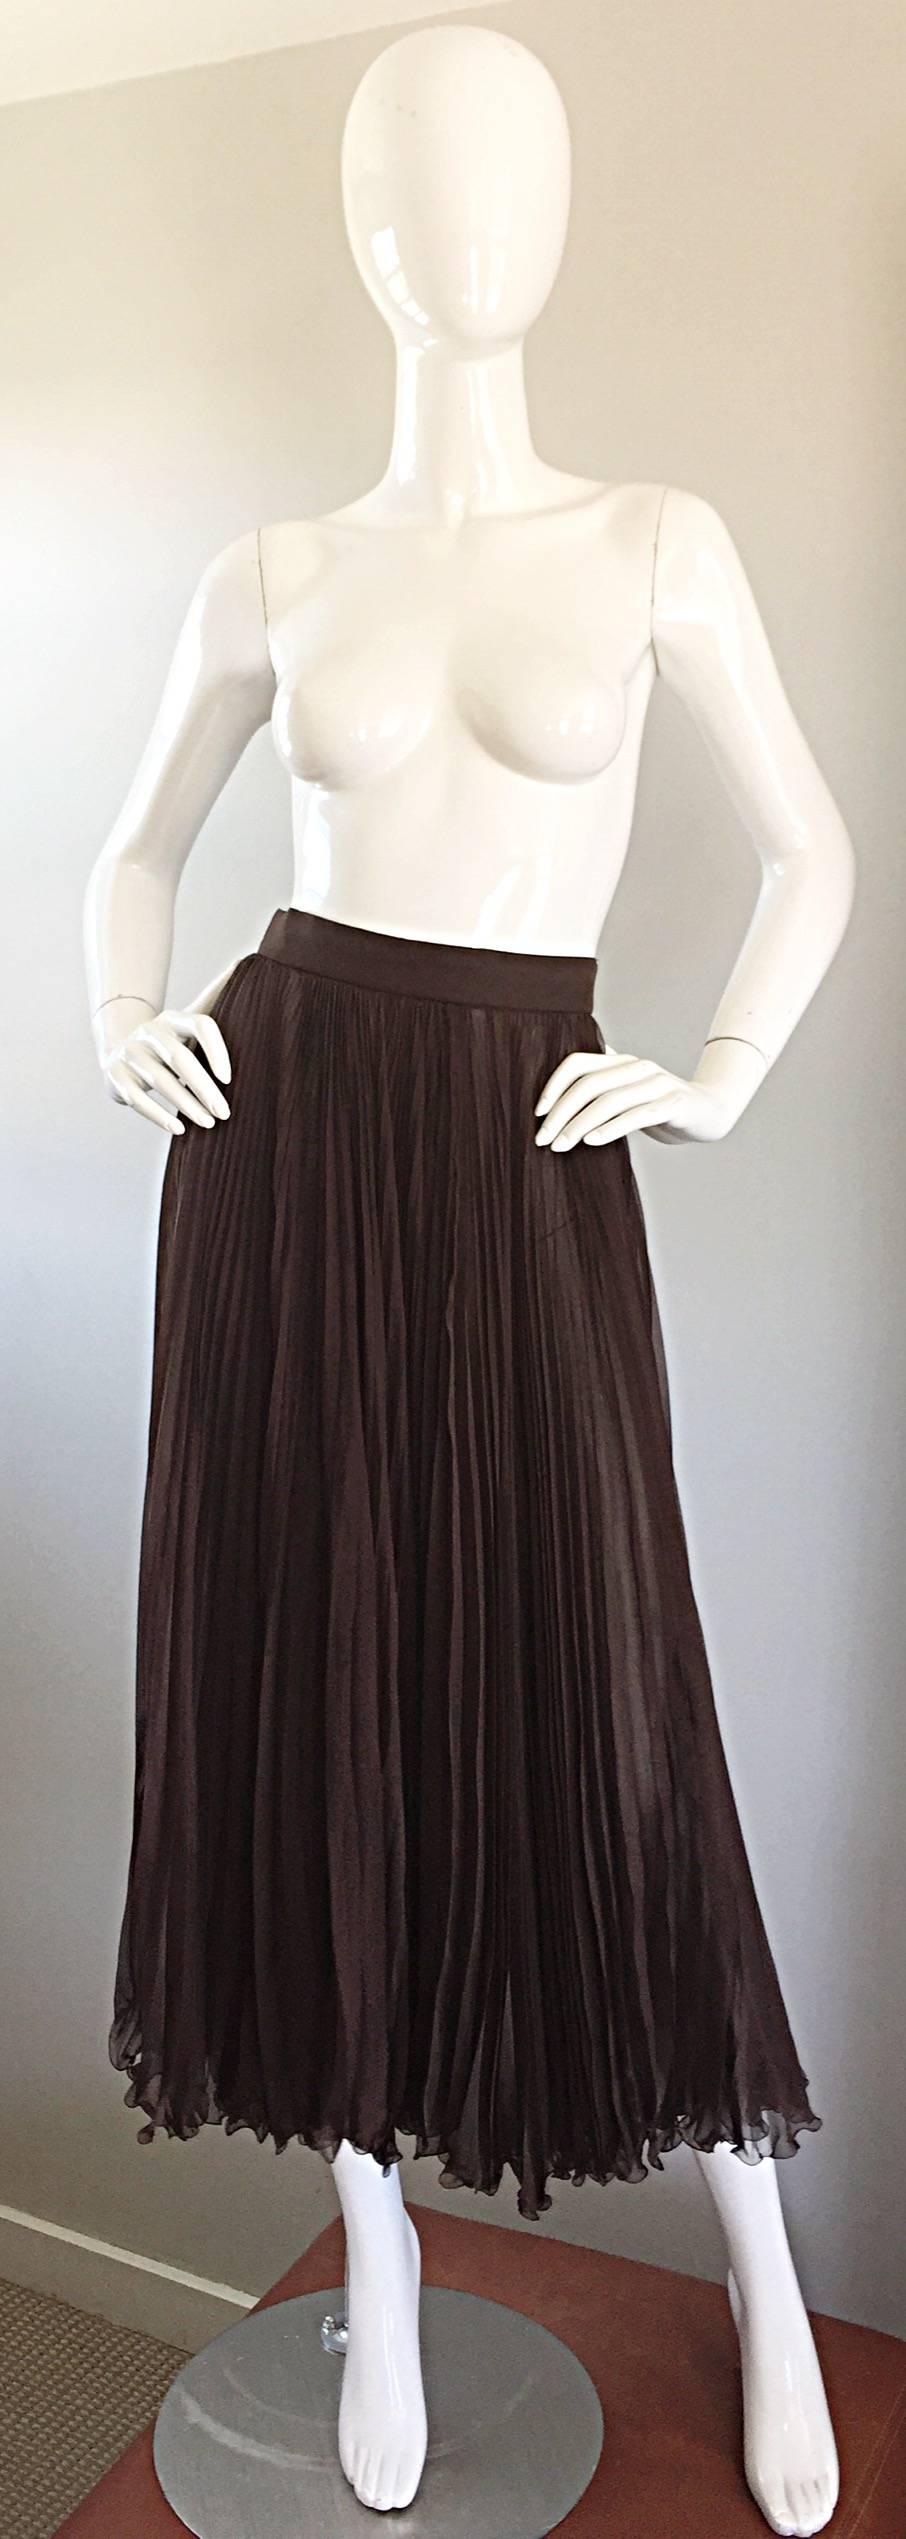 Exceptional vintage 1970s / 70s VALENTINO chocolate brown silk chiffon high waisted pleated midi skirt! Words cannot even express the beauty of this amazing skirt! Multiple layers of the softest silk chiffon that looks absolutely breathtaking with